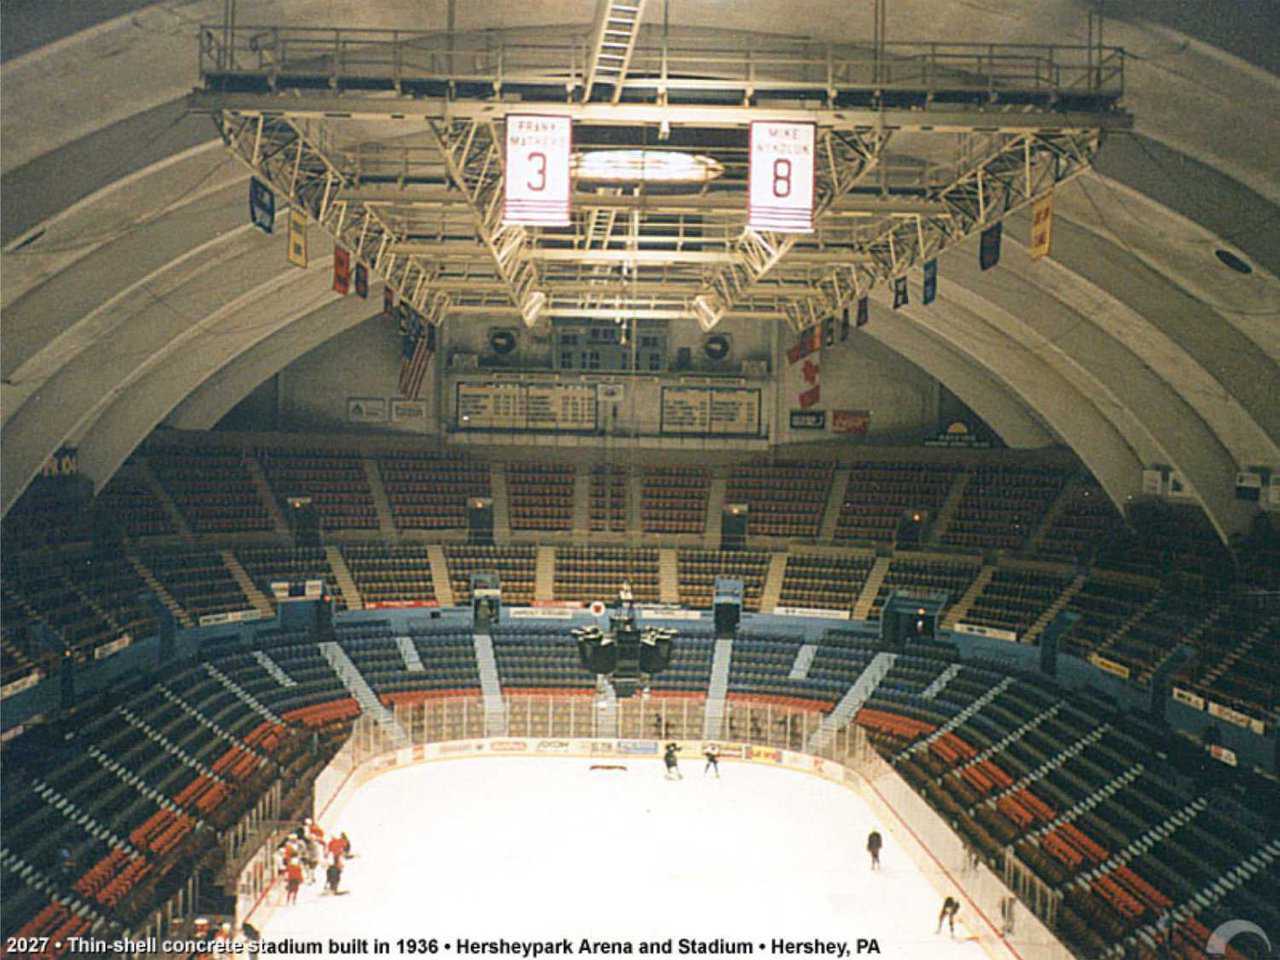 Hershey Park Arena—Hershey, Pennsylvania  — Hershey Park Arena, with seating for 7,350, has been home to hockey since its construction.